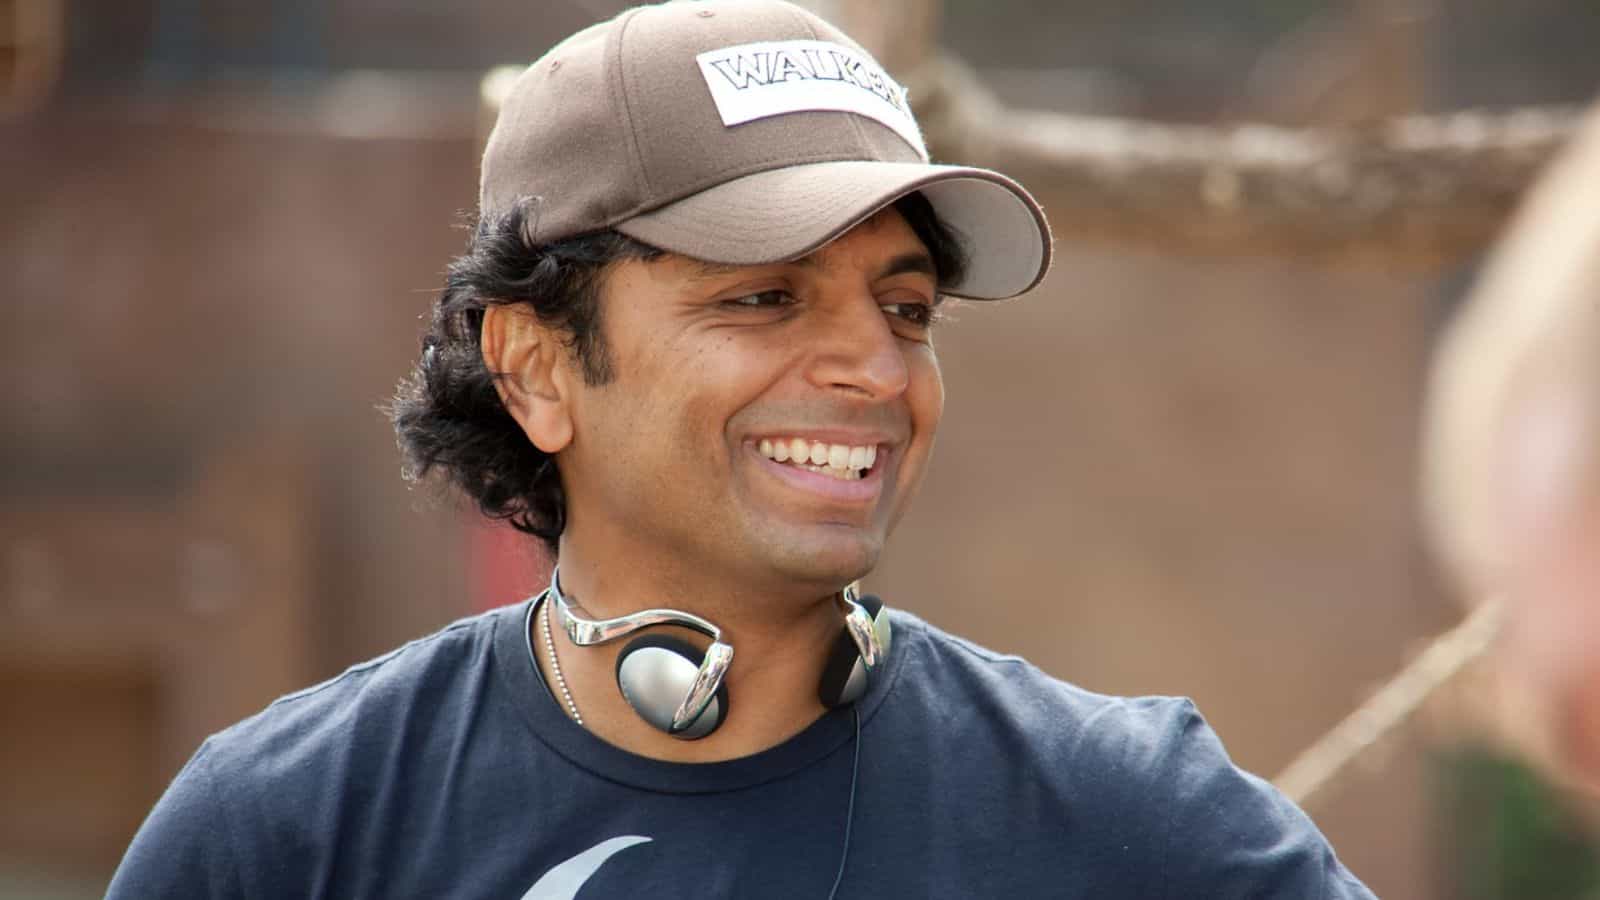 Critic vs. Audience Scores of All of M. Night Shyamalan's Movies